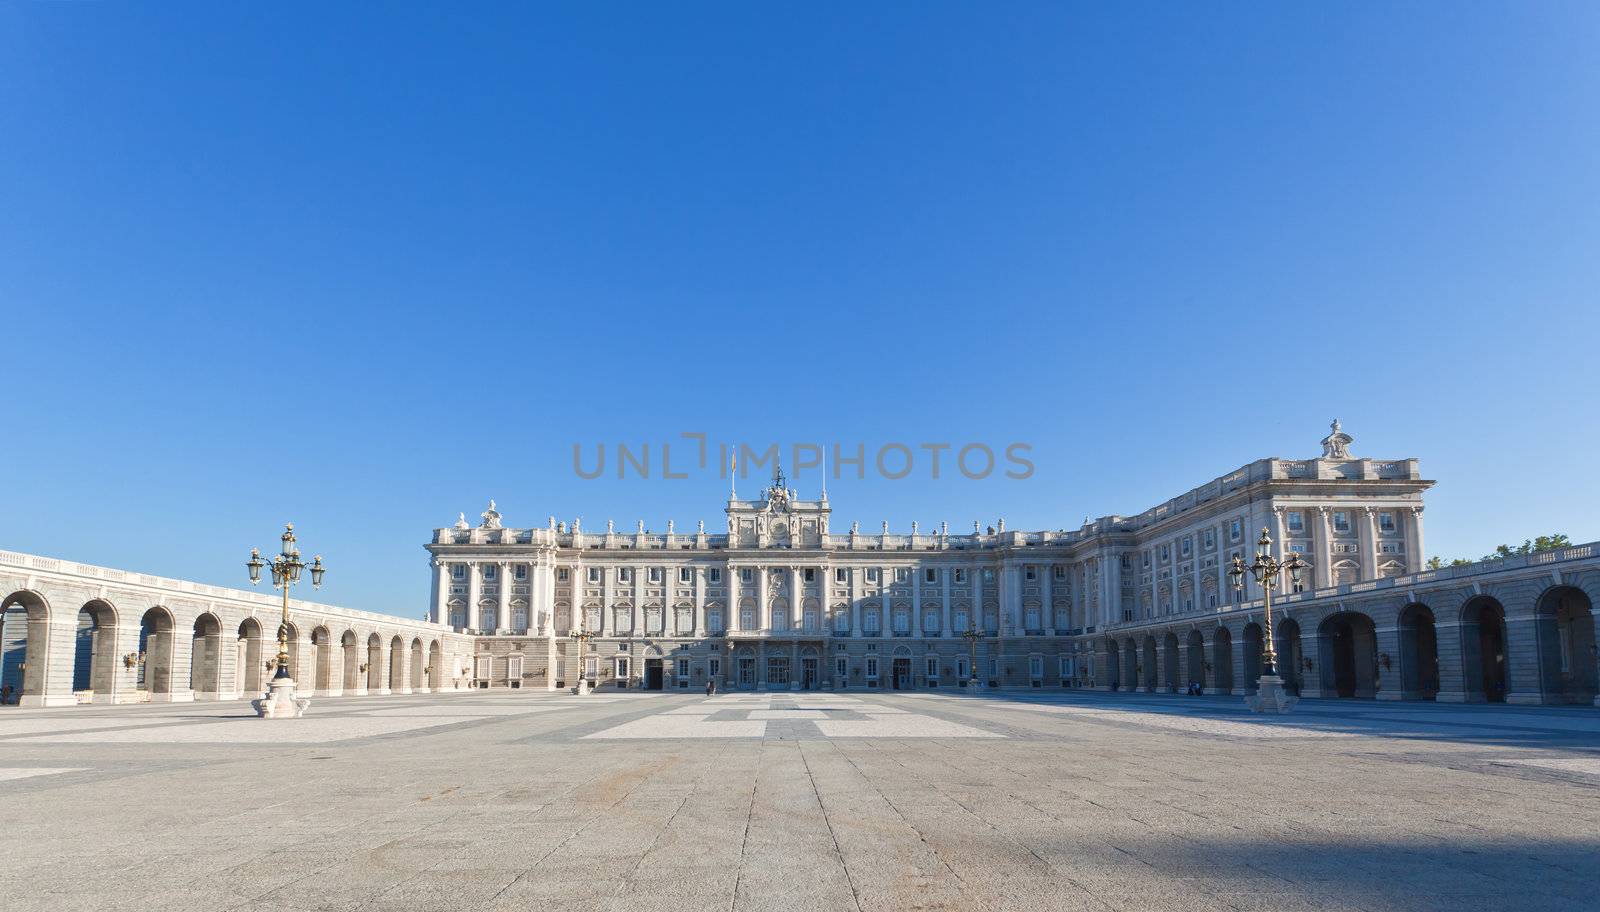 The Royal Palace in Madrid by gary718